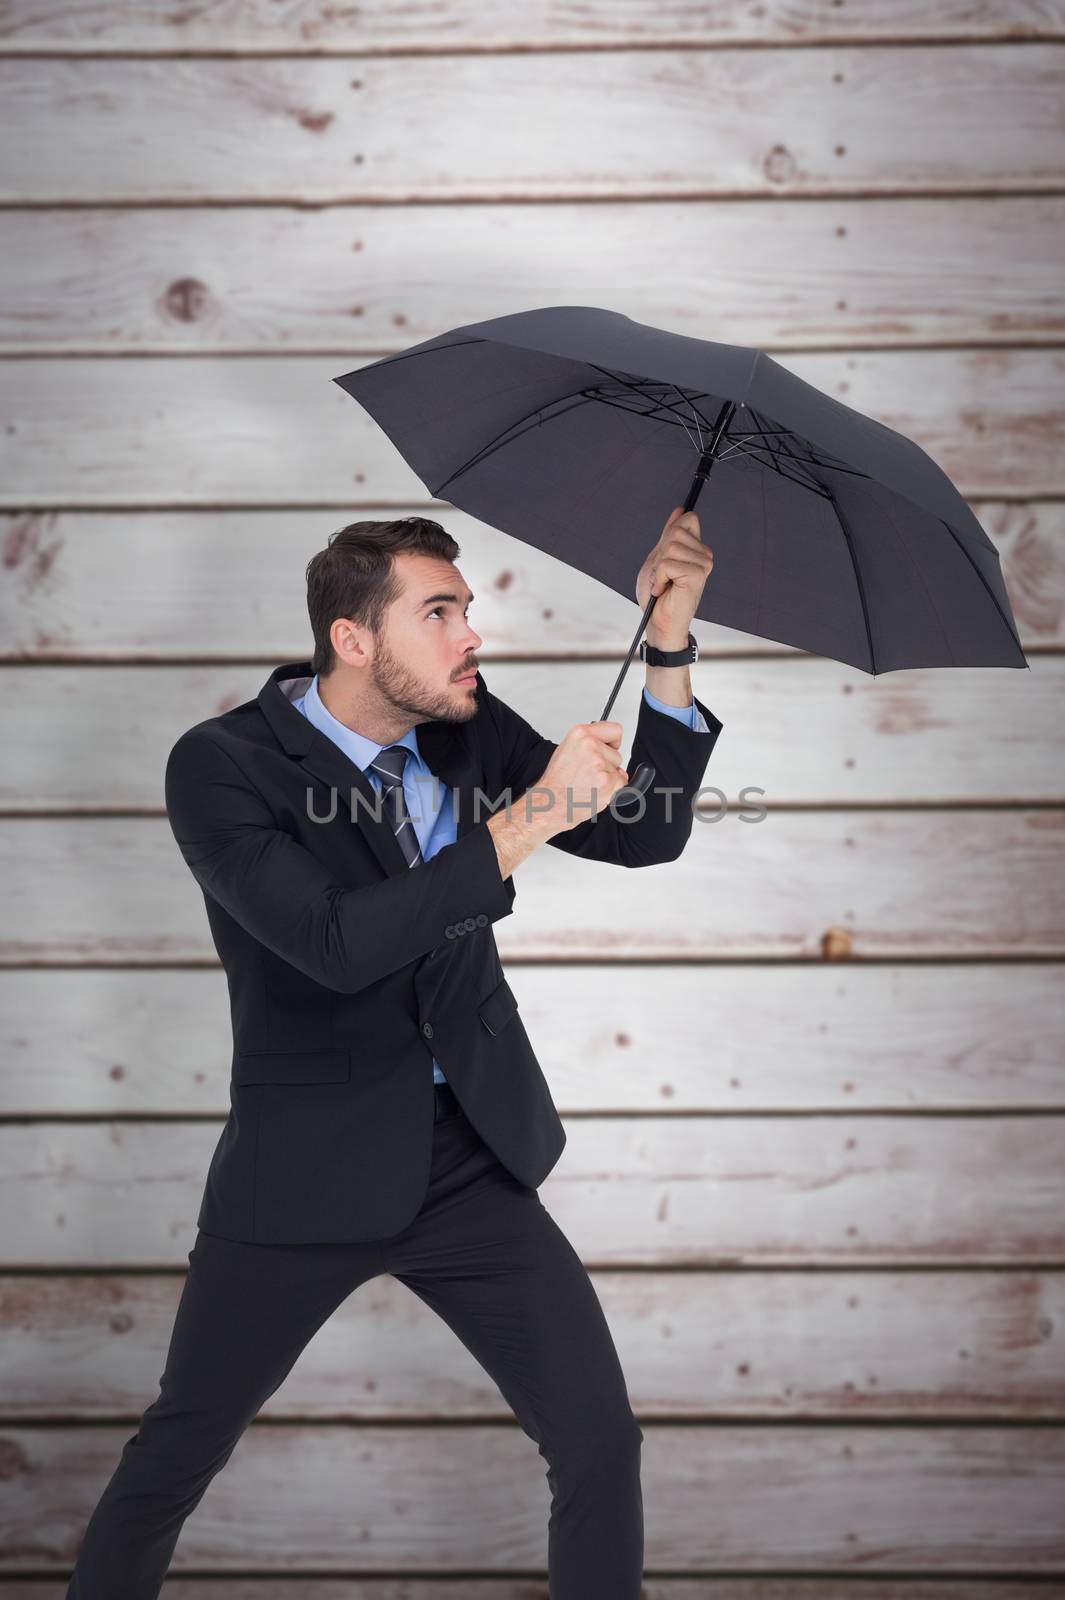 Composite image of businessman holding umbrella to protect himself by Wavebreakmedia